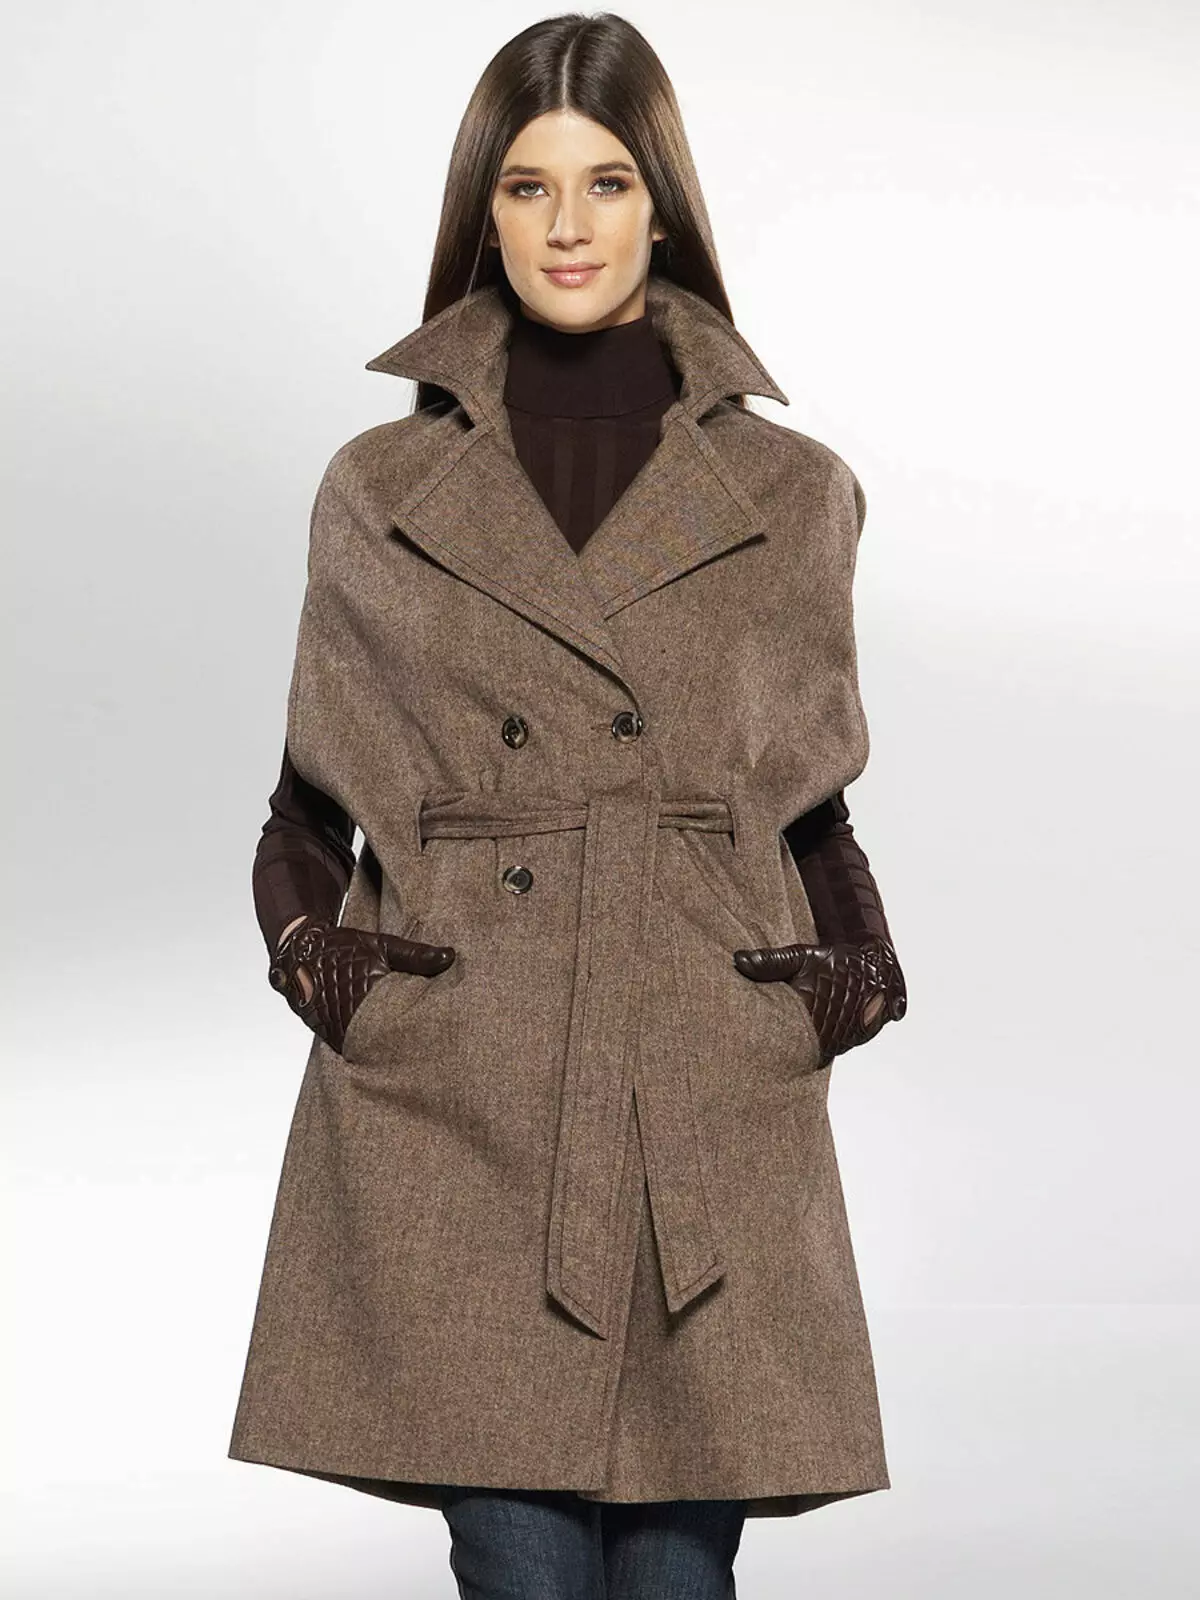 Winter Women's Coat (384 photos): Fashionable 2021 on Sintepsum, Hooded, Youth, Woolen, For Pregnant, Coat Down 643_224